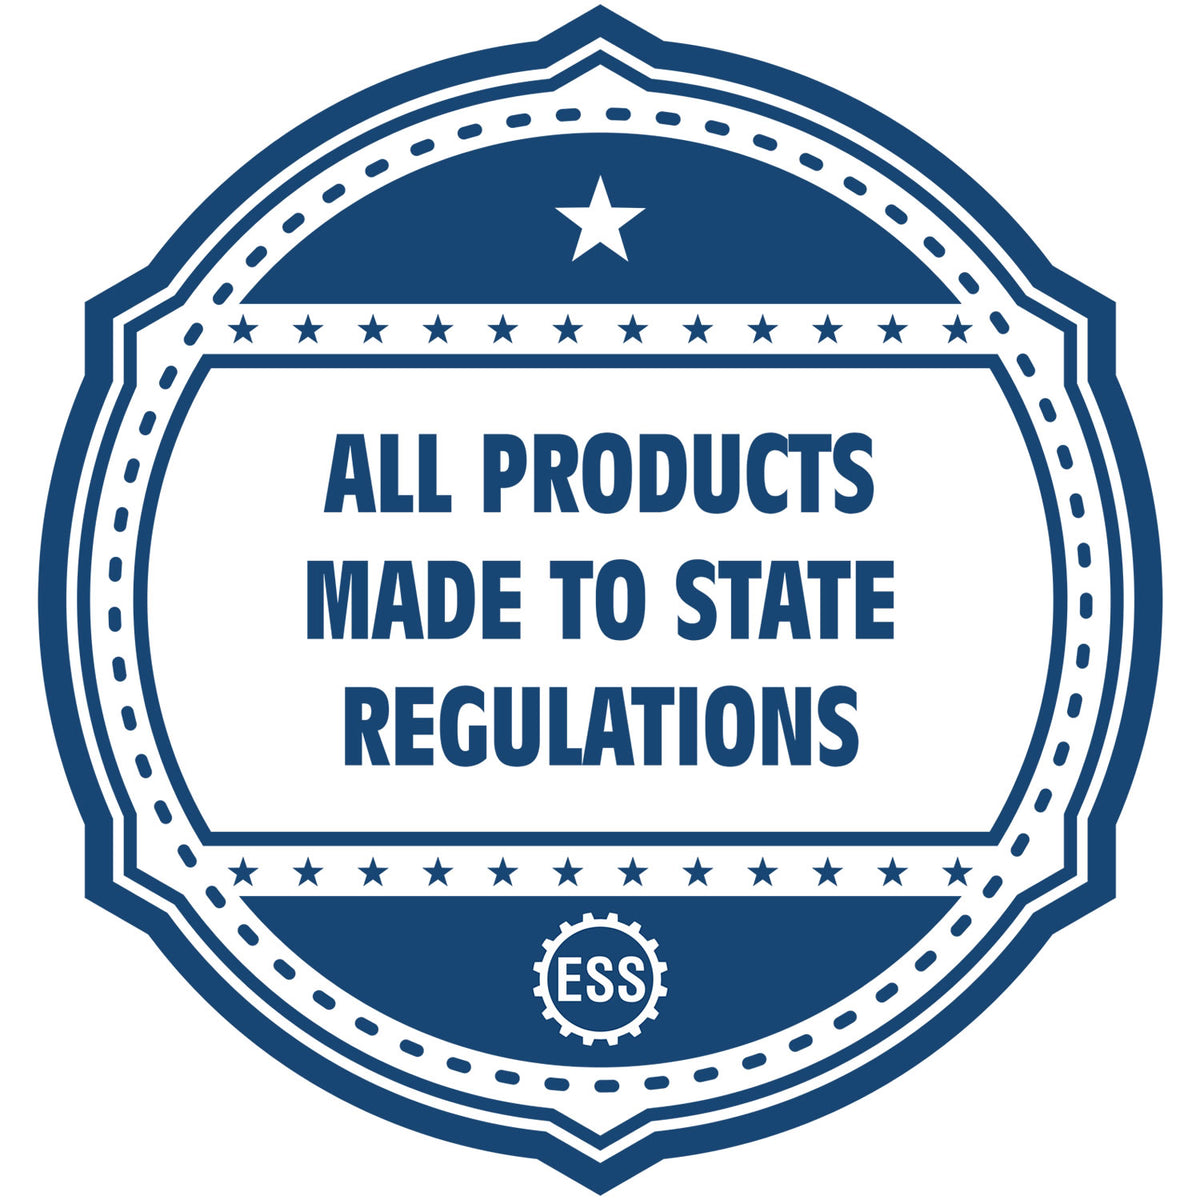 An icon or badge element for the Delaware Professional Engineer Seal Stamp showing that this product is made in compliance with state regulations.